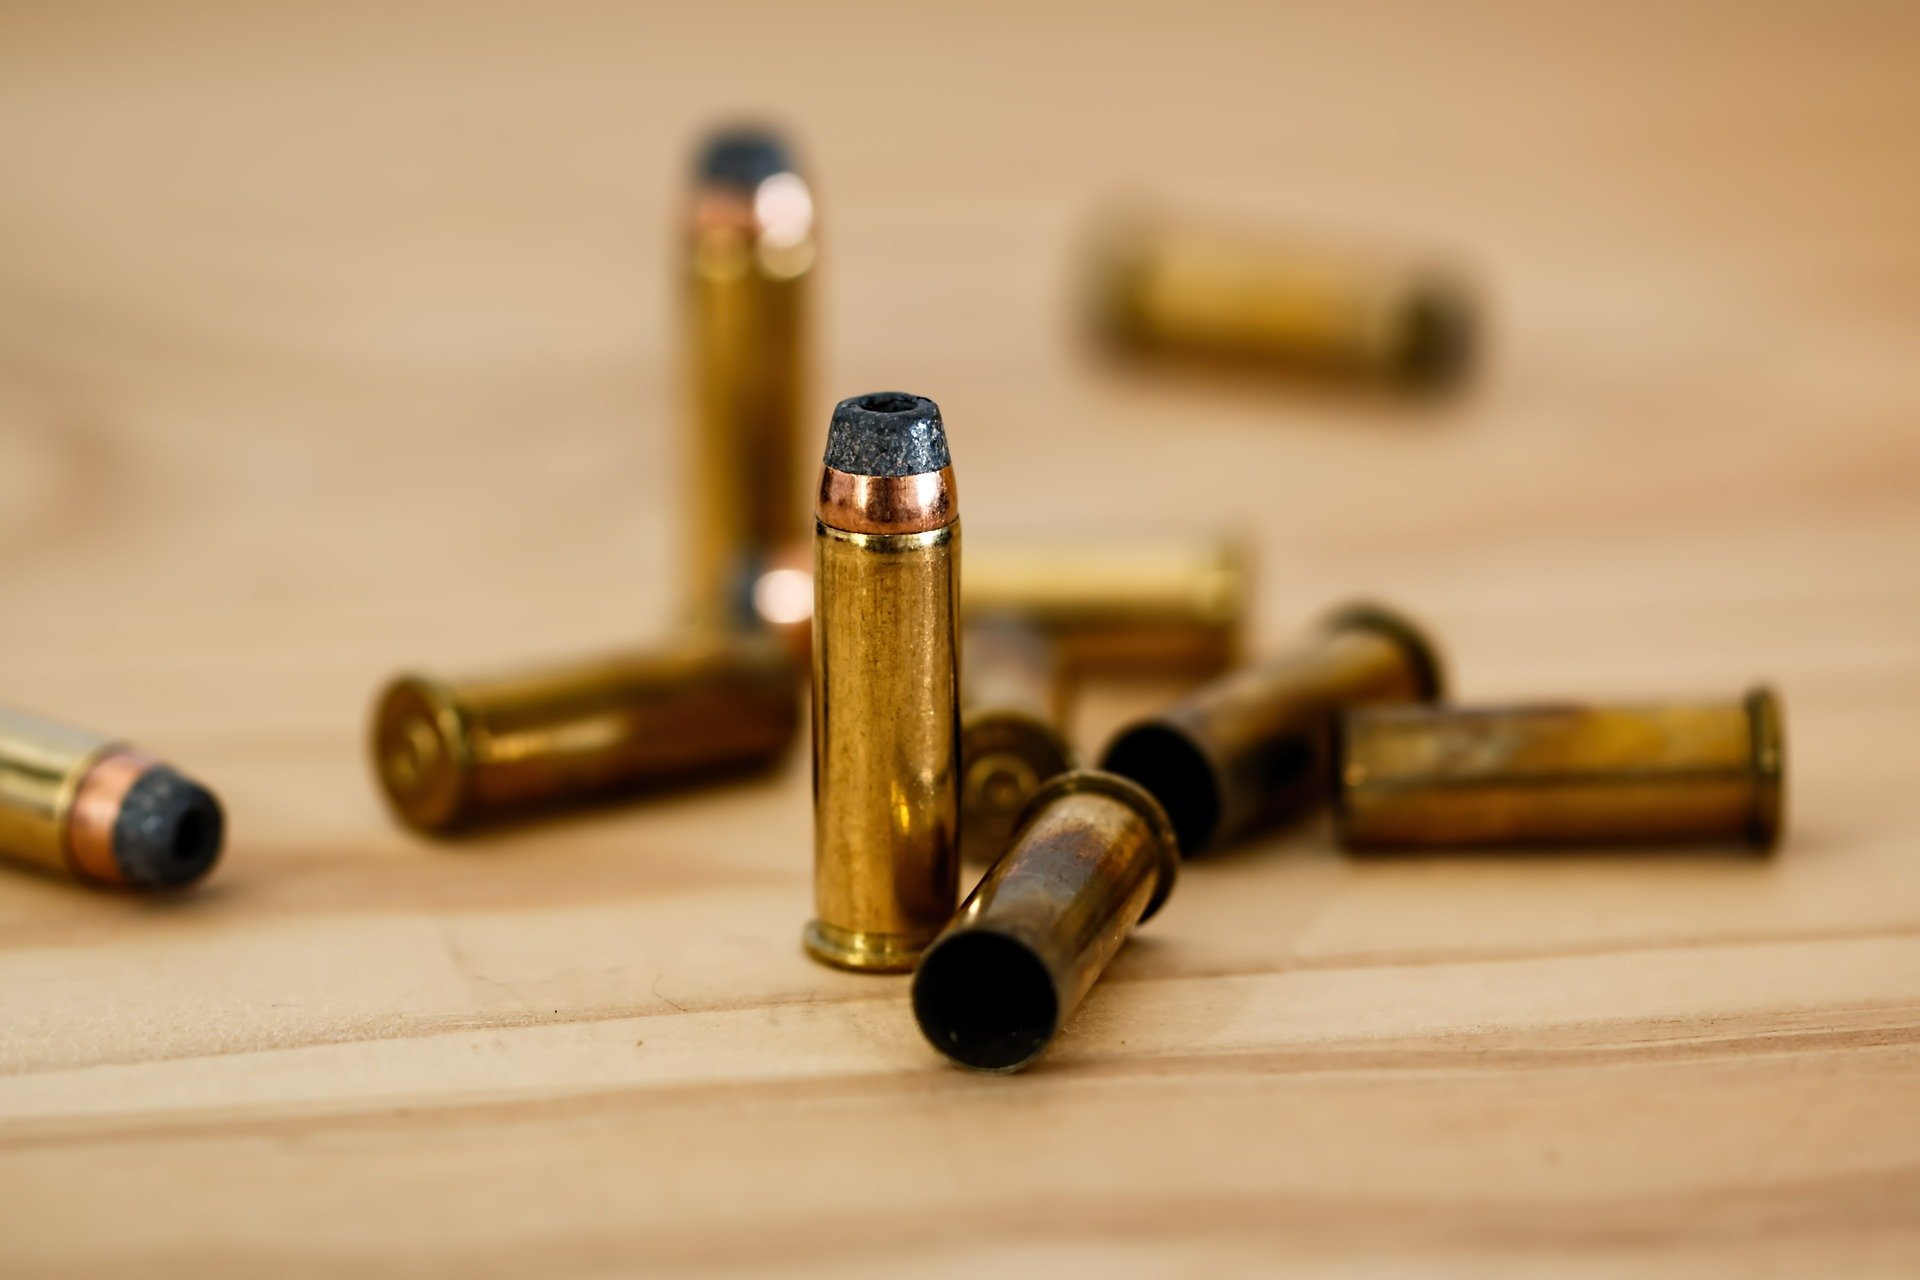 A picture of pistol bullets | Source: Pixabay